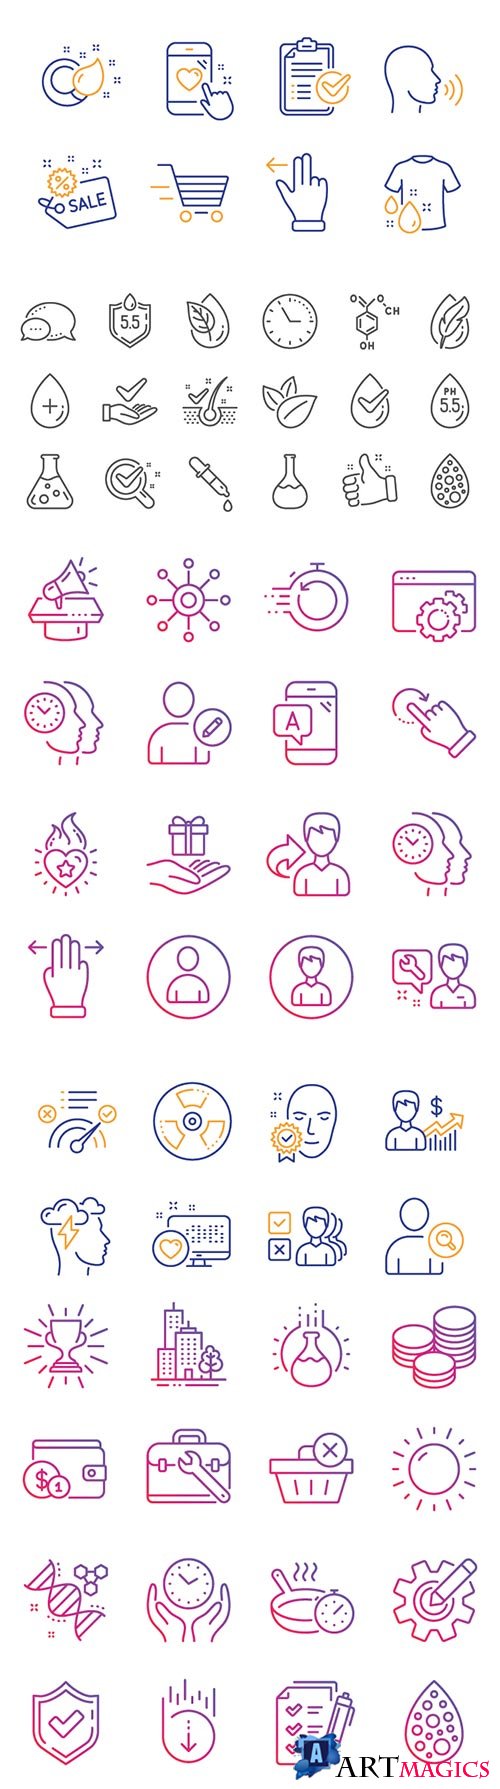 Business vector icons set